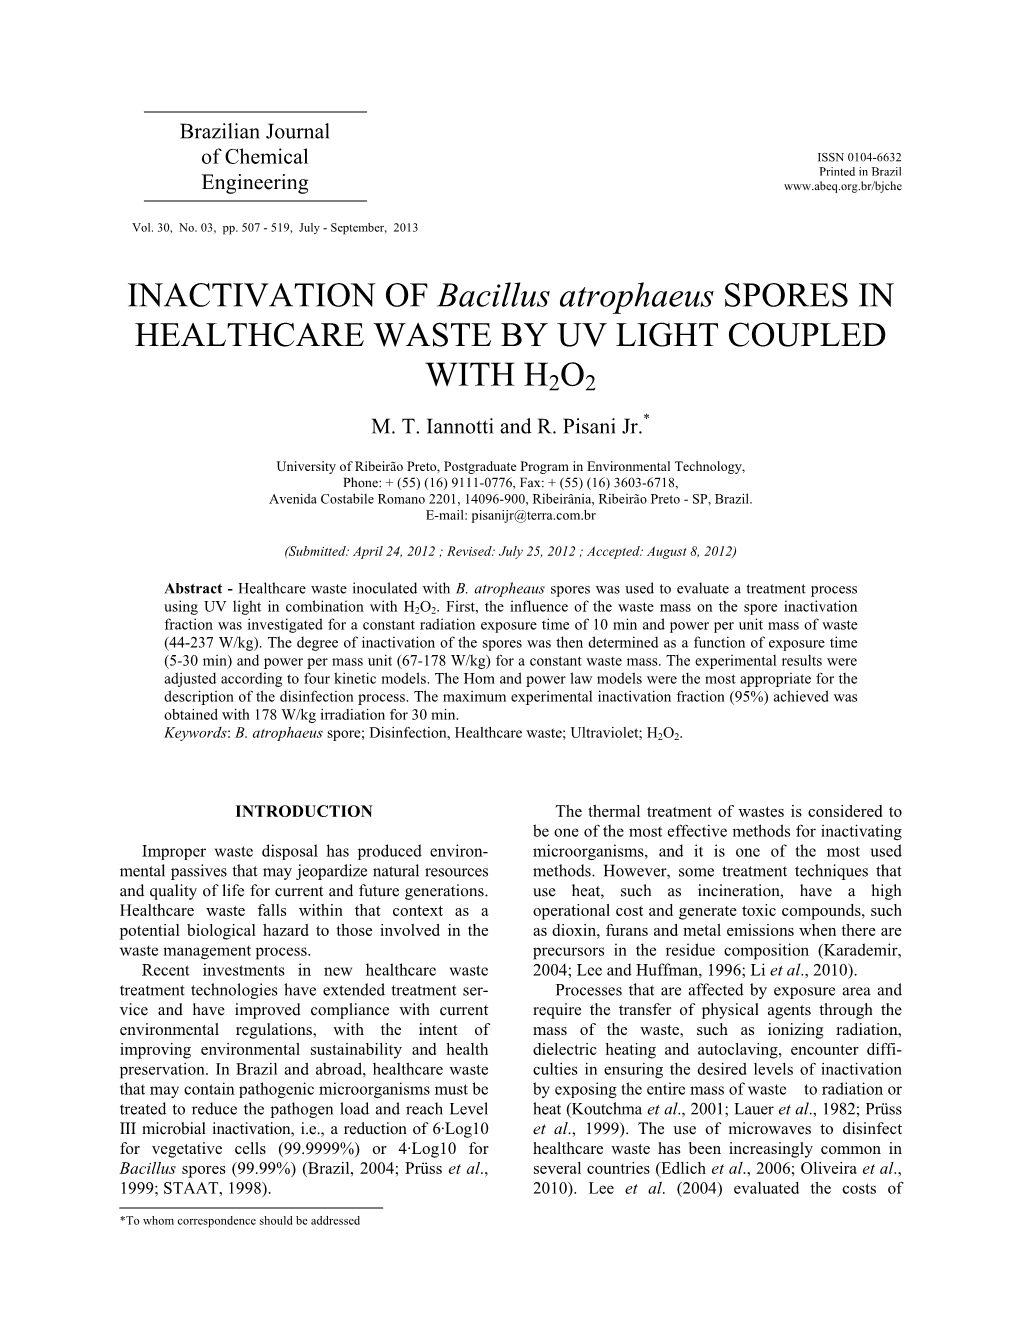 INACTIVATION of Bacillus Atrophaeus SPORES in HEALTHCARE WASTE by UV LIGHT COUPLED with H2O2